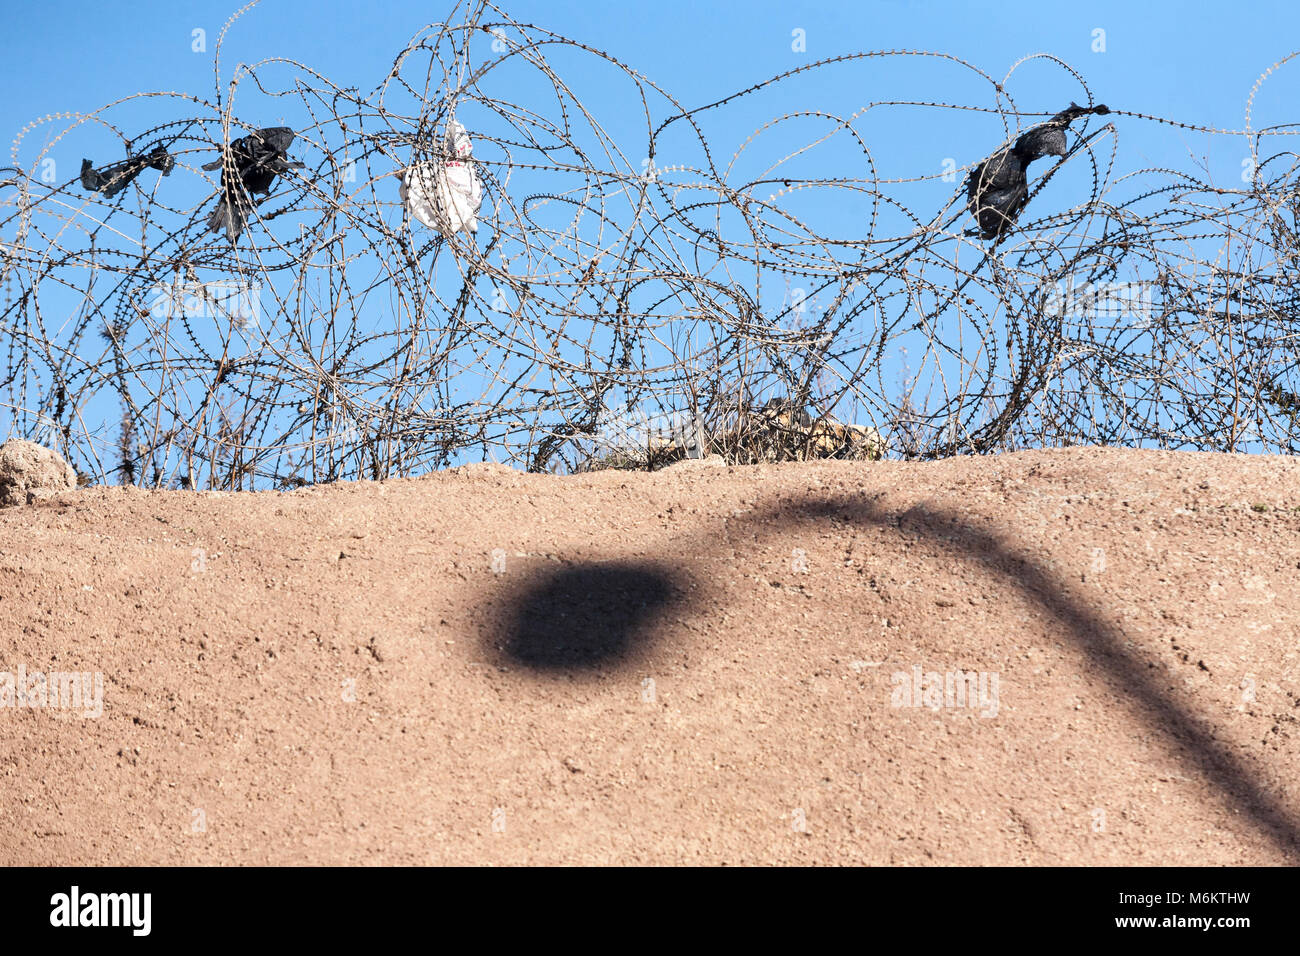 Barbed wire on a desert - like countryside Stock Photo